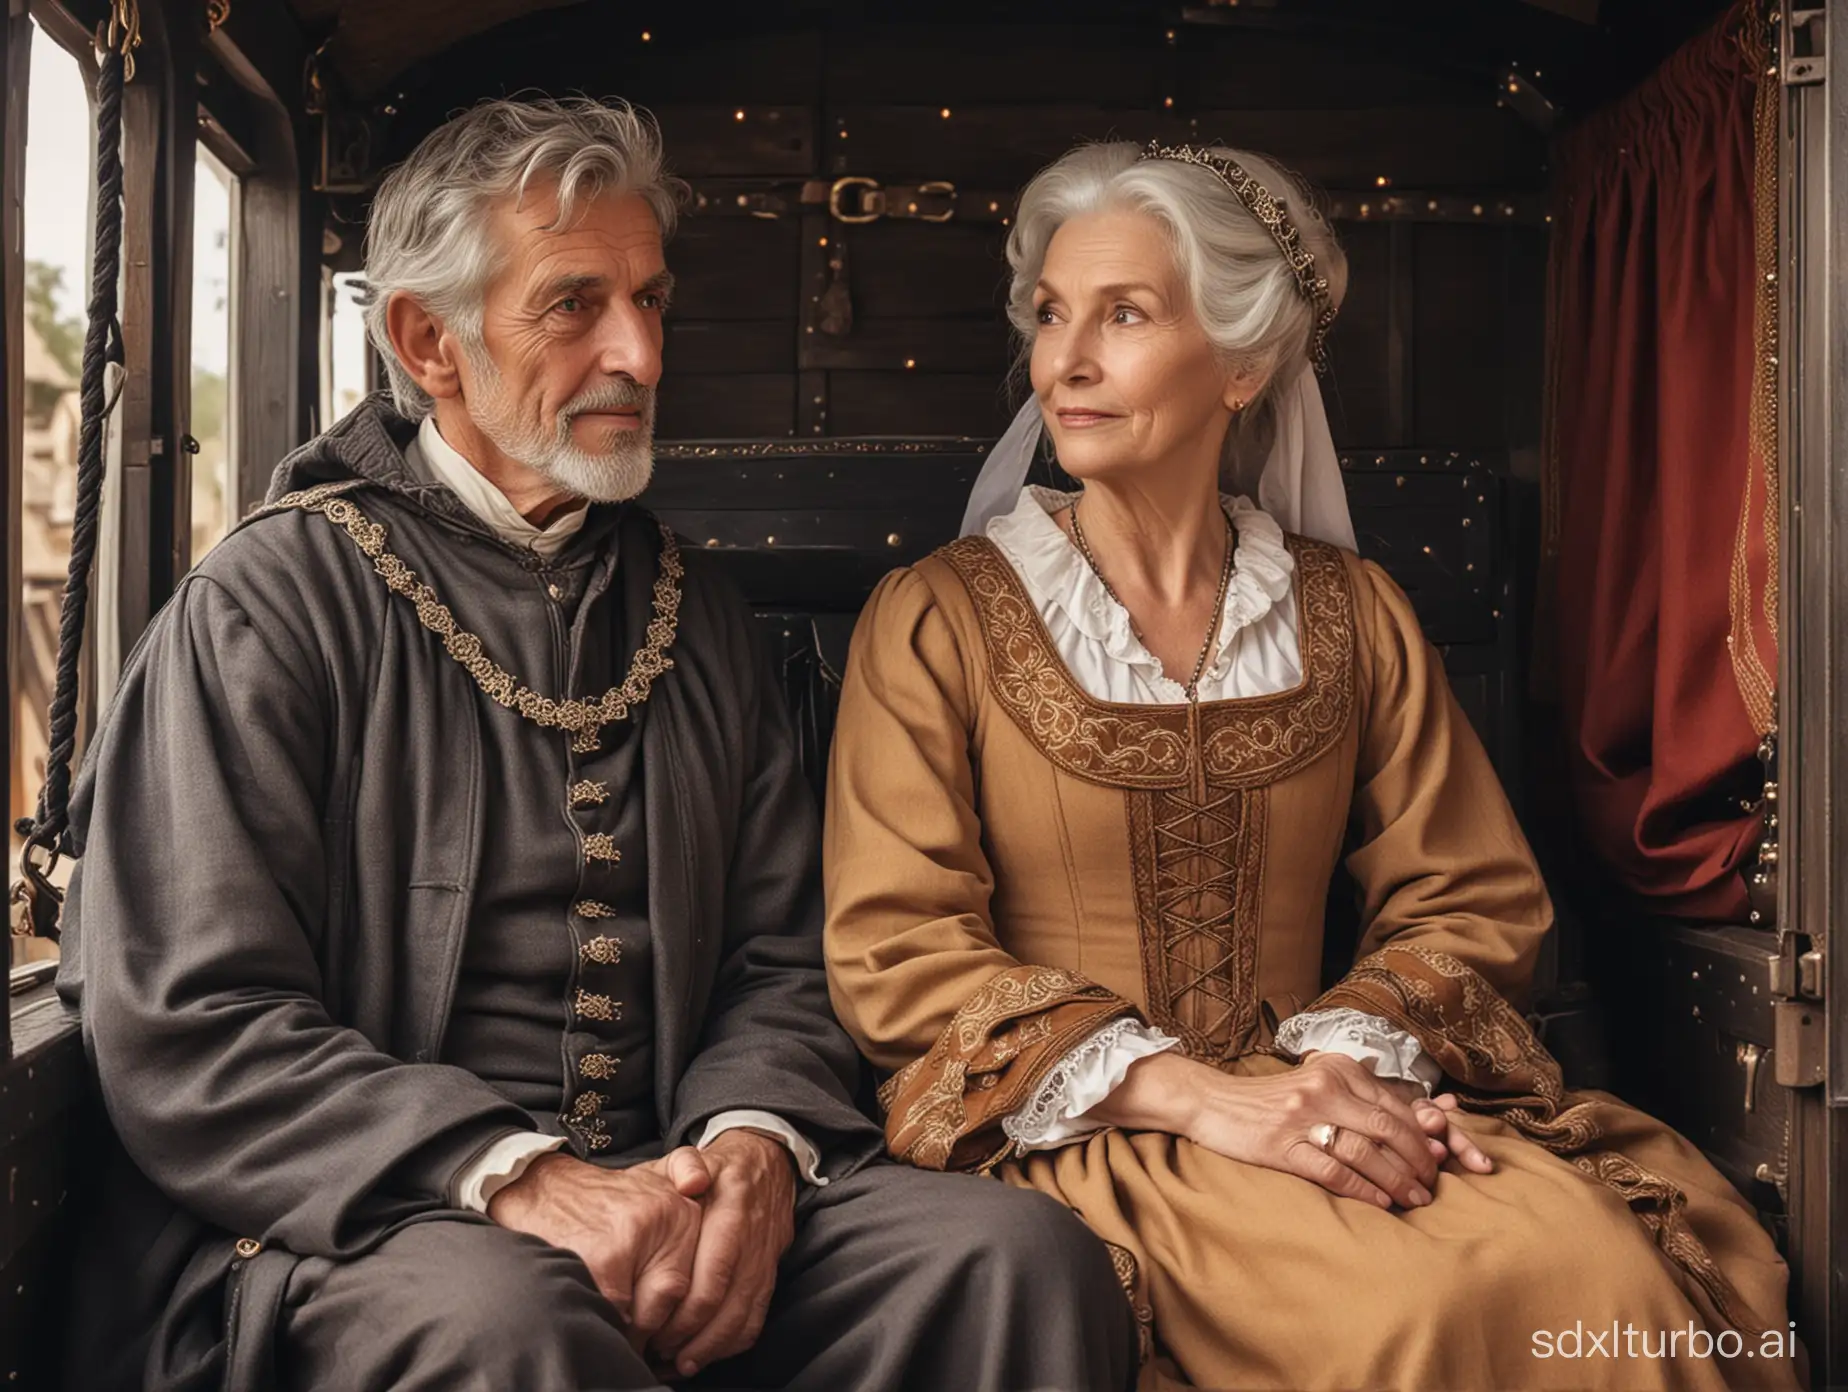 A medieval elderly gray-haired husband and wife in medieval outfit sit side by side in a covered stagecoach gazing lovingly at each other